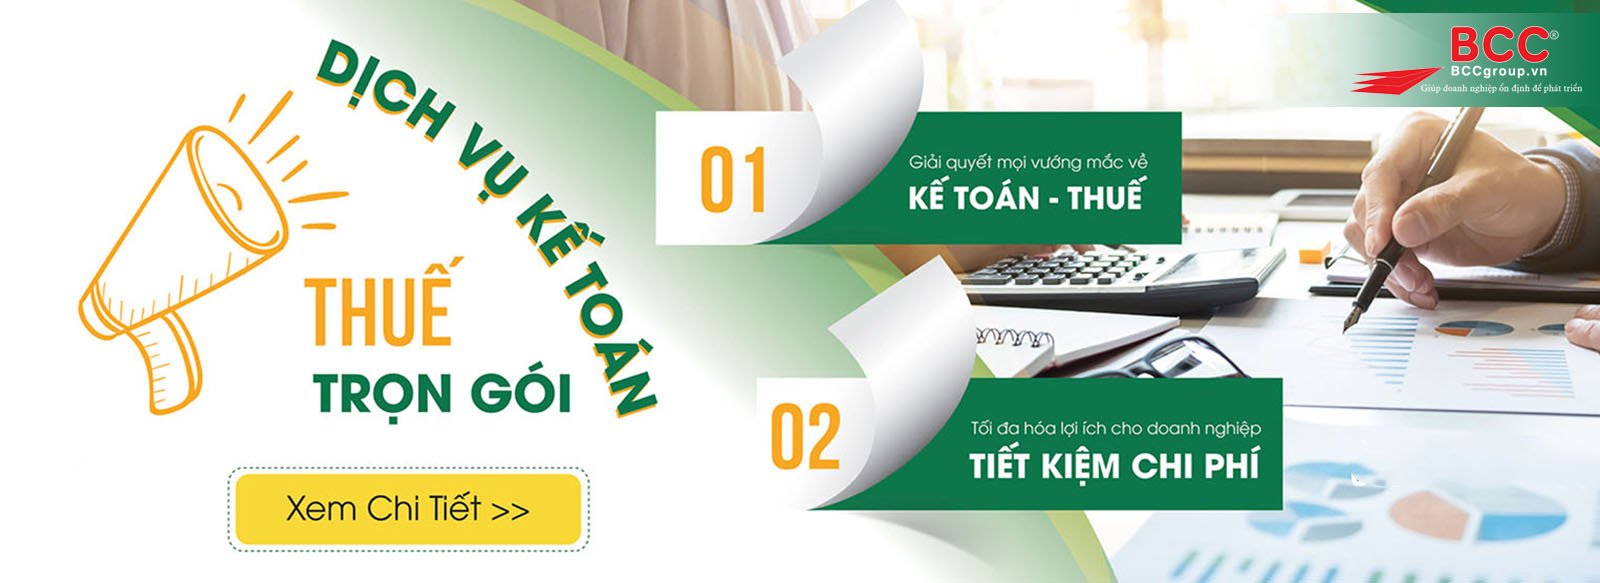 Banner quang cao